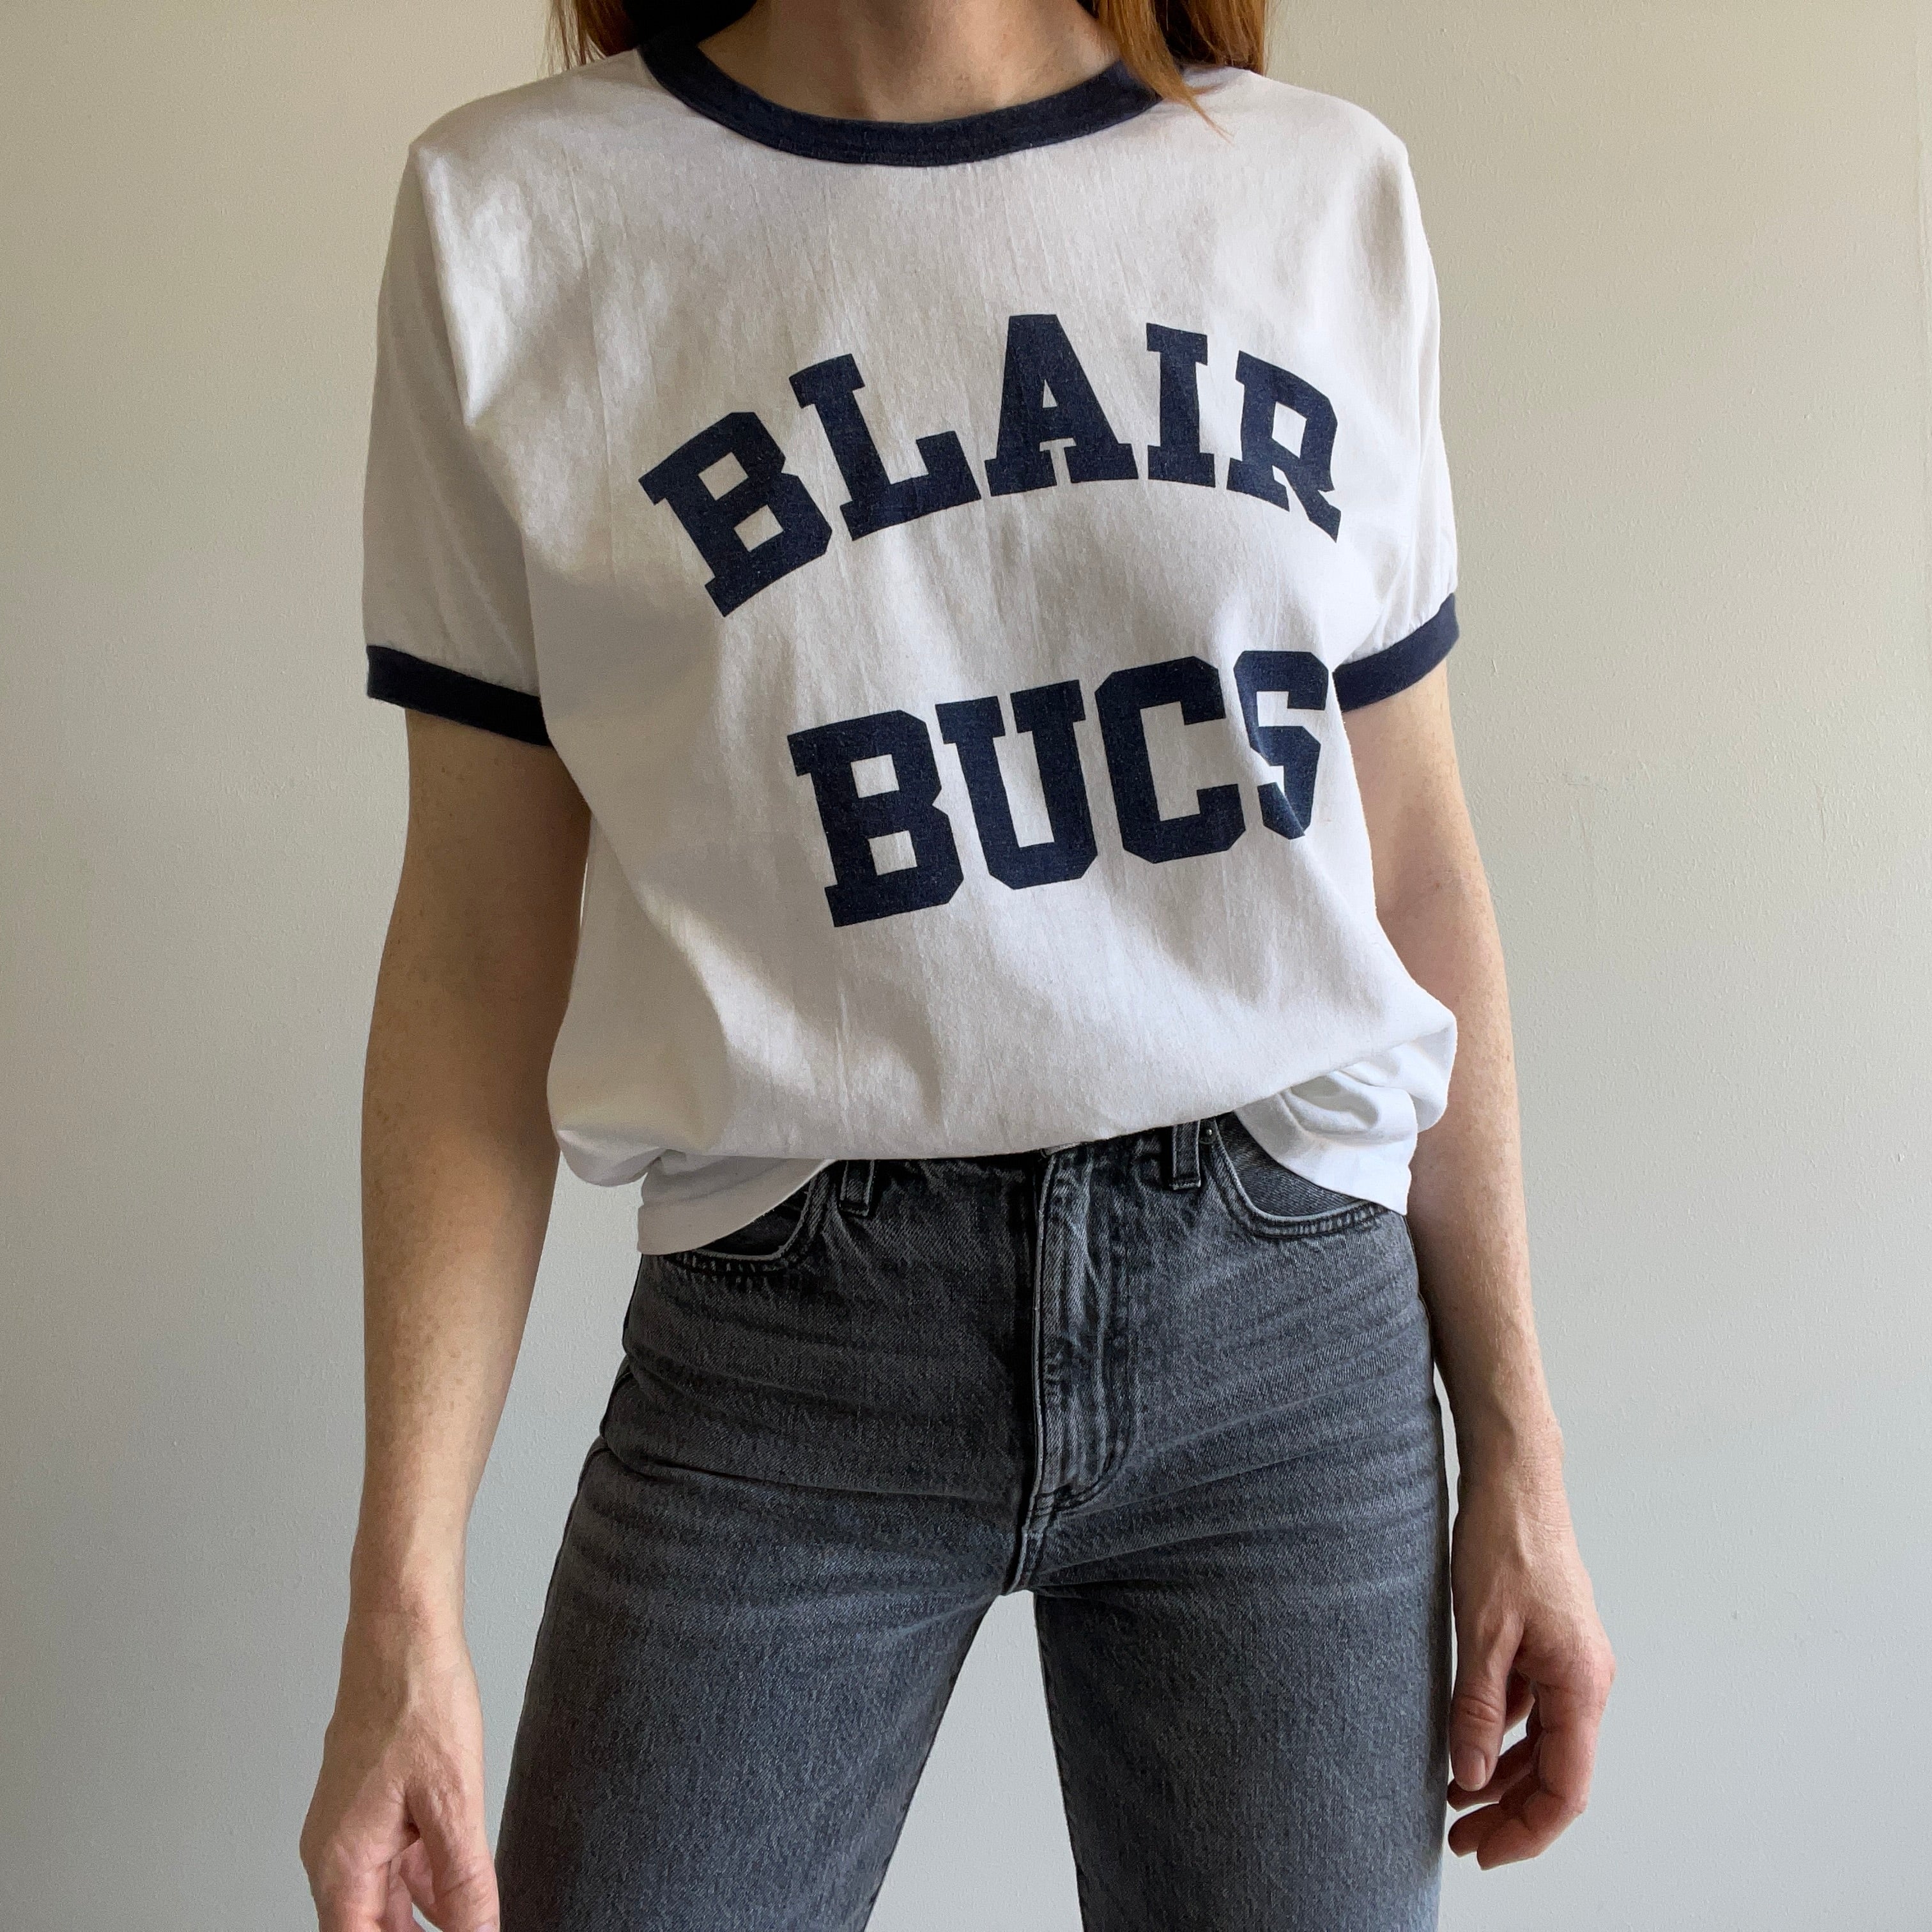 1980s Champion Brand Blair Bucs with Sharpie on the Backside Ring T-Shirt